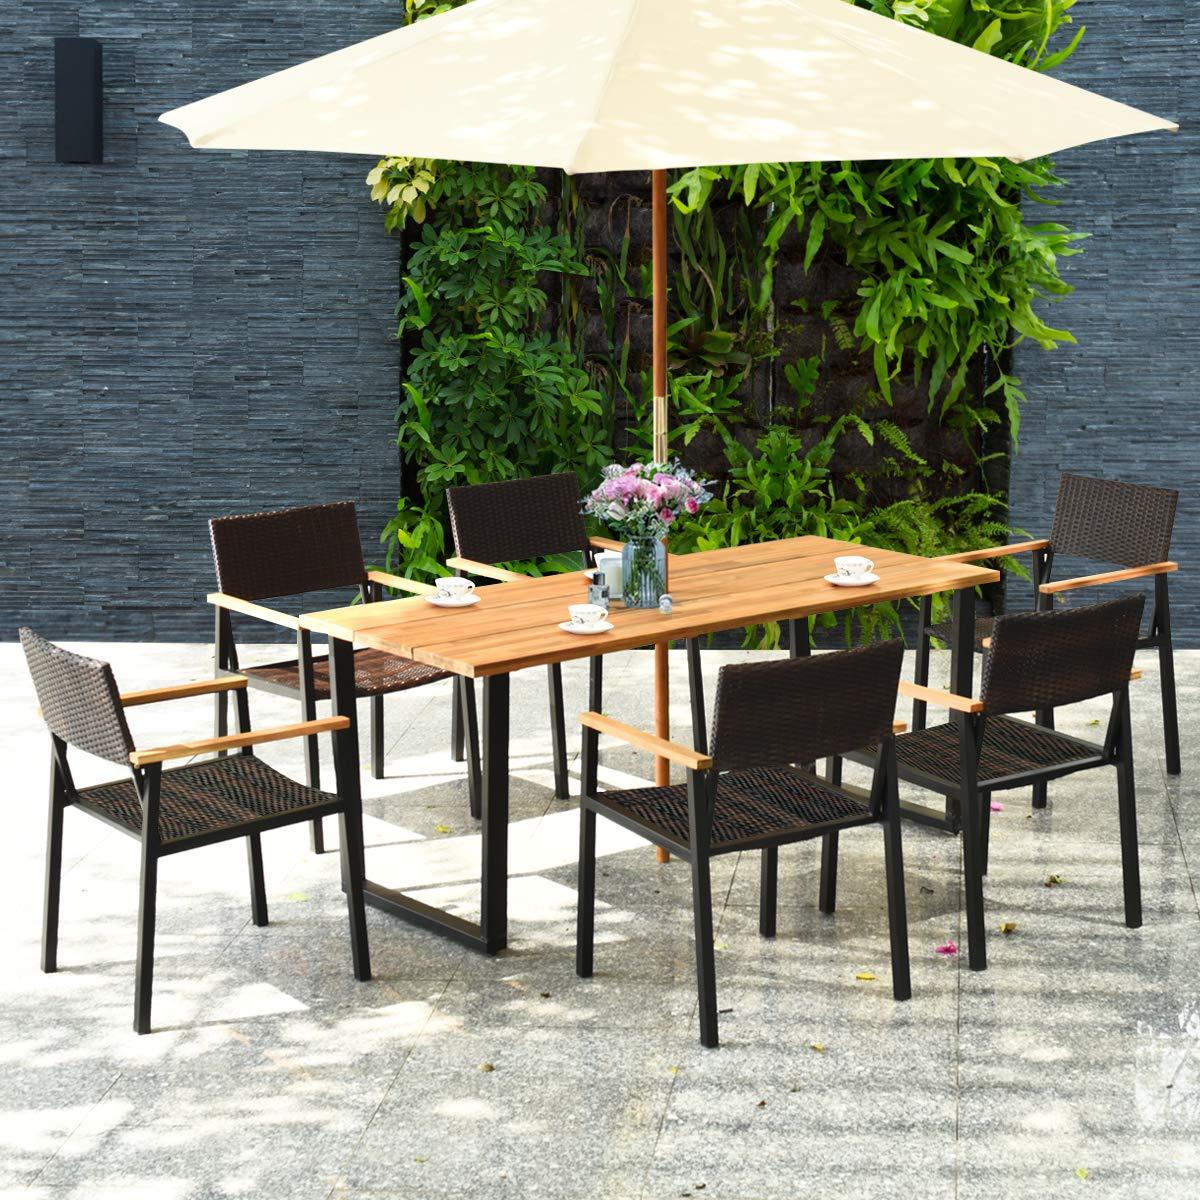 Tangkula 7 Pieces Outdoor Dining Set, Patented Patio Furniture Set w/Large Rectangle Acacia Wood Table Top, Rattan Chairs with Steel Frame, Umbrella Hole, for Backyard Garden - CookCave